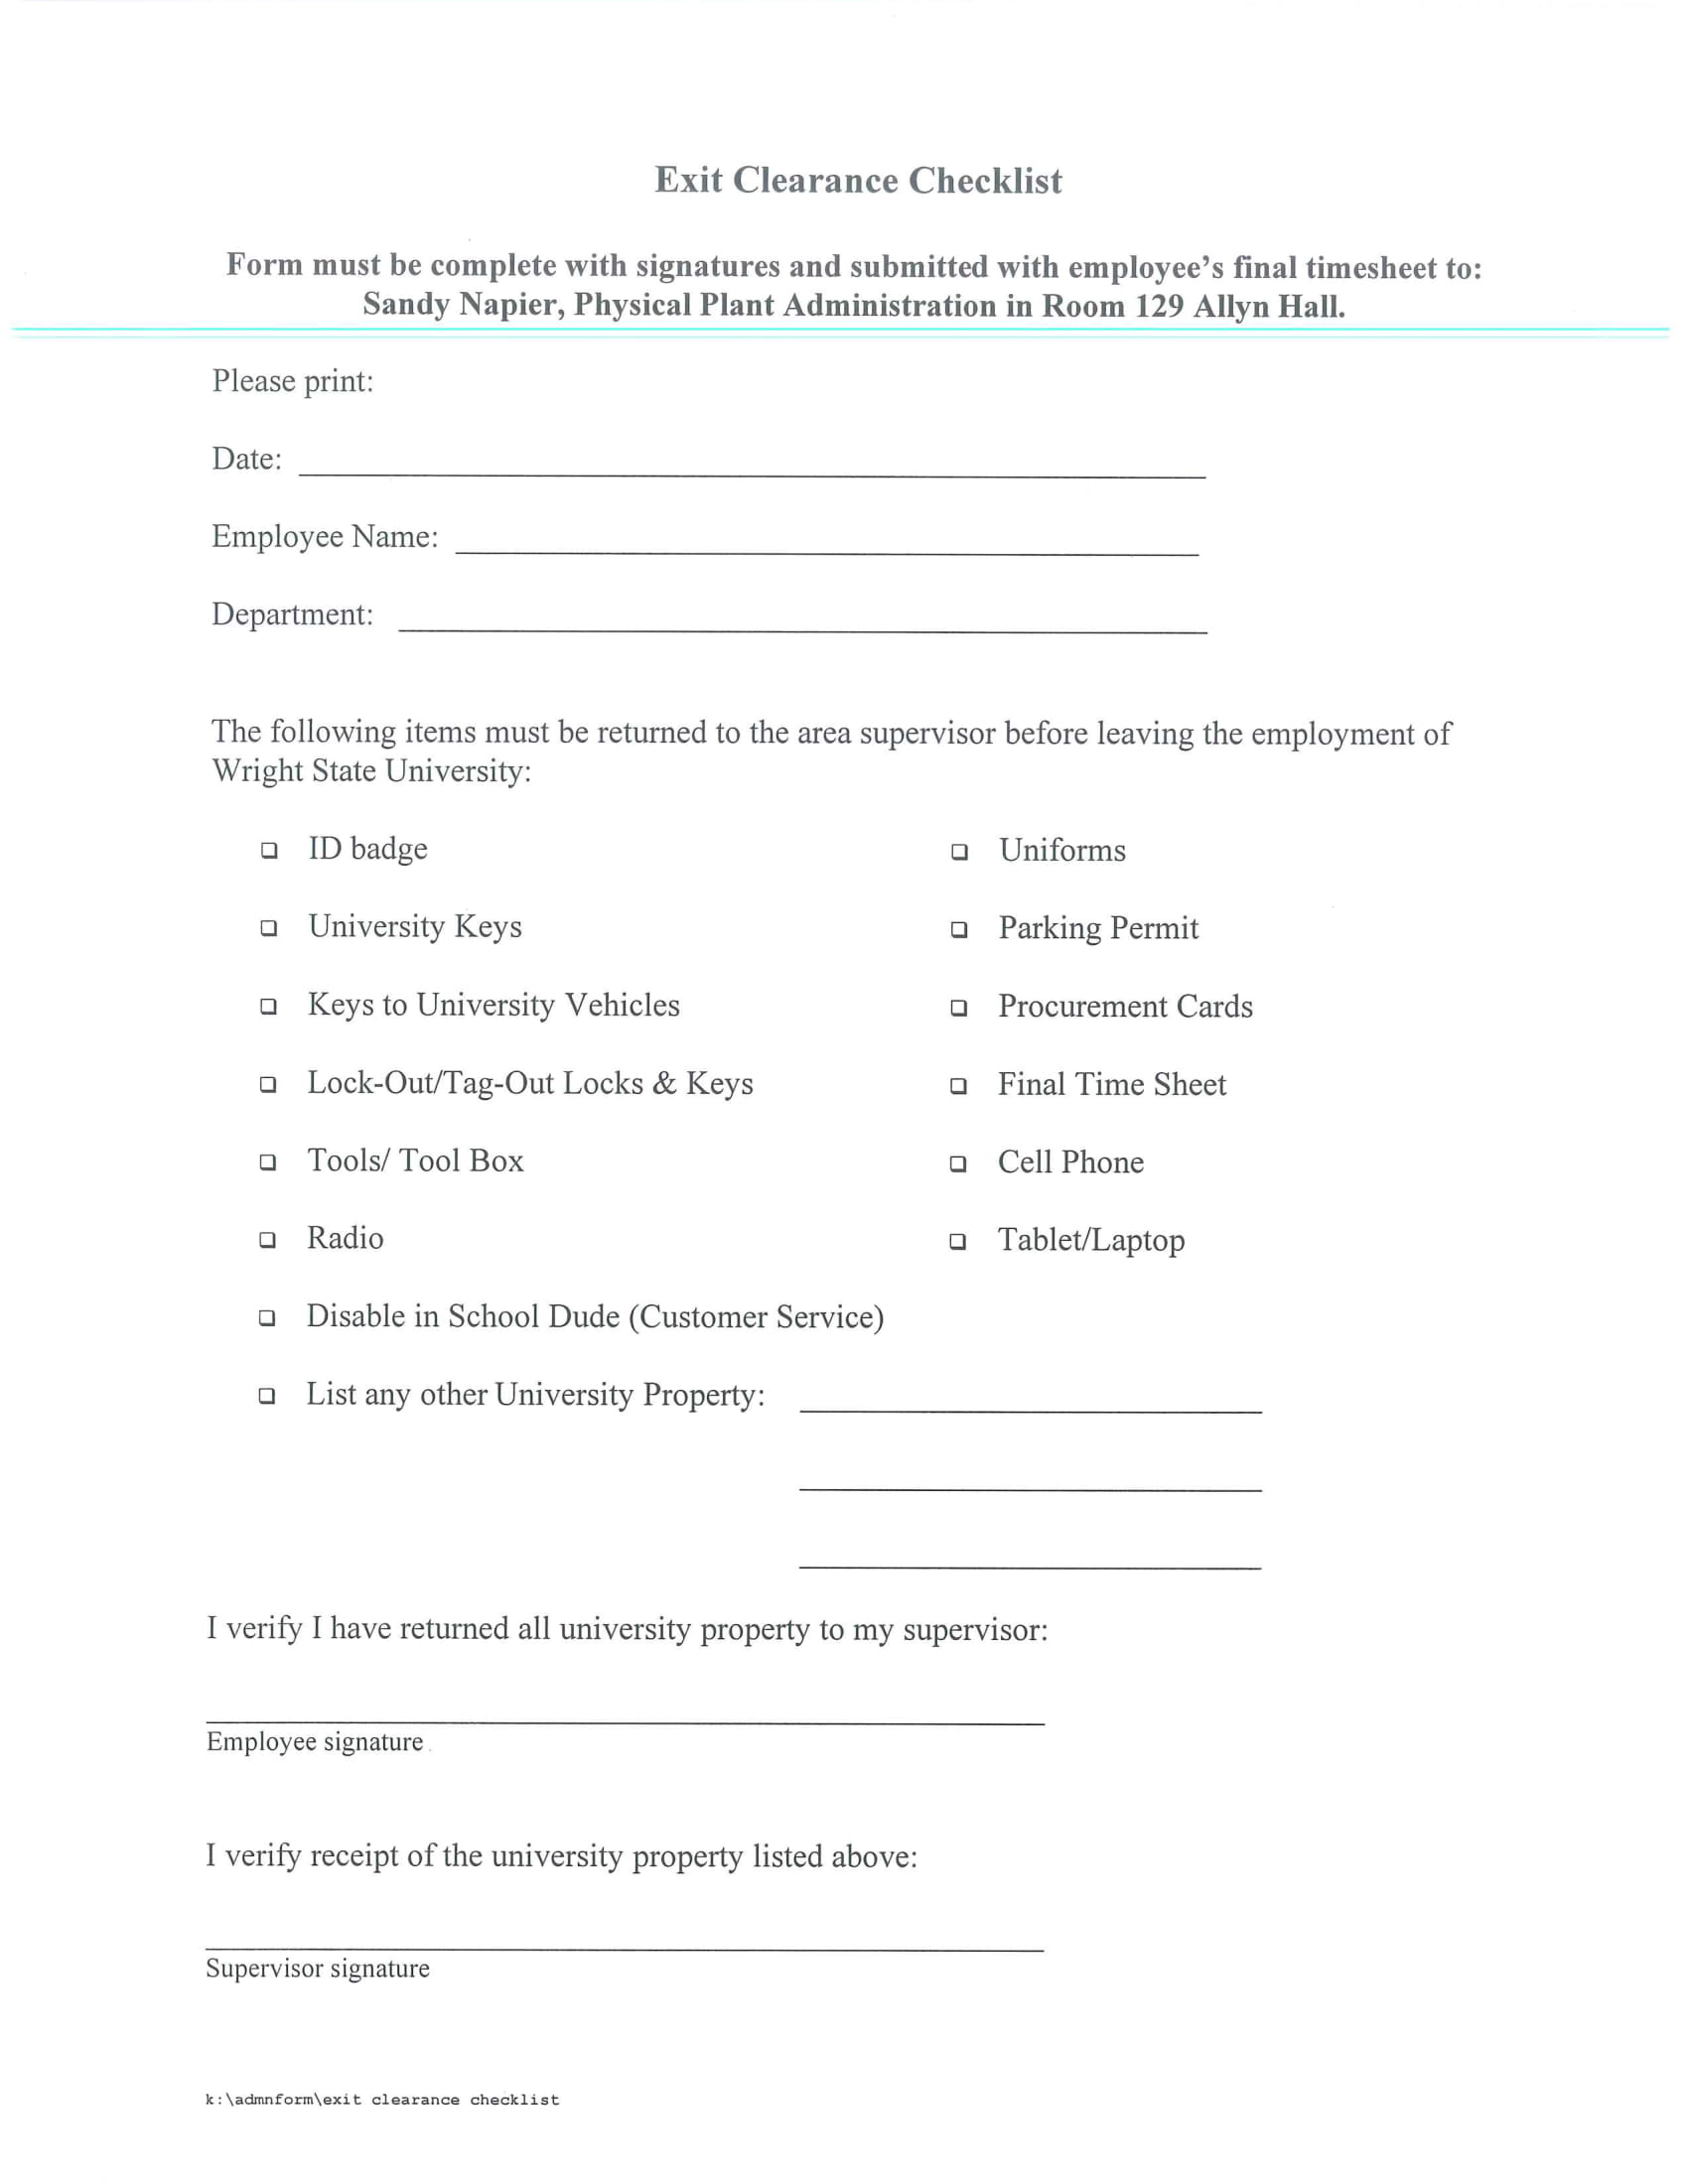 exit clearance checklist form 1